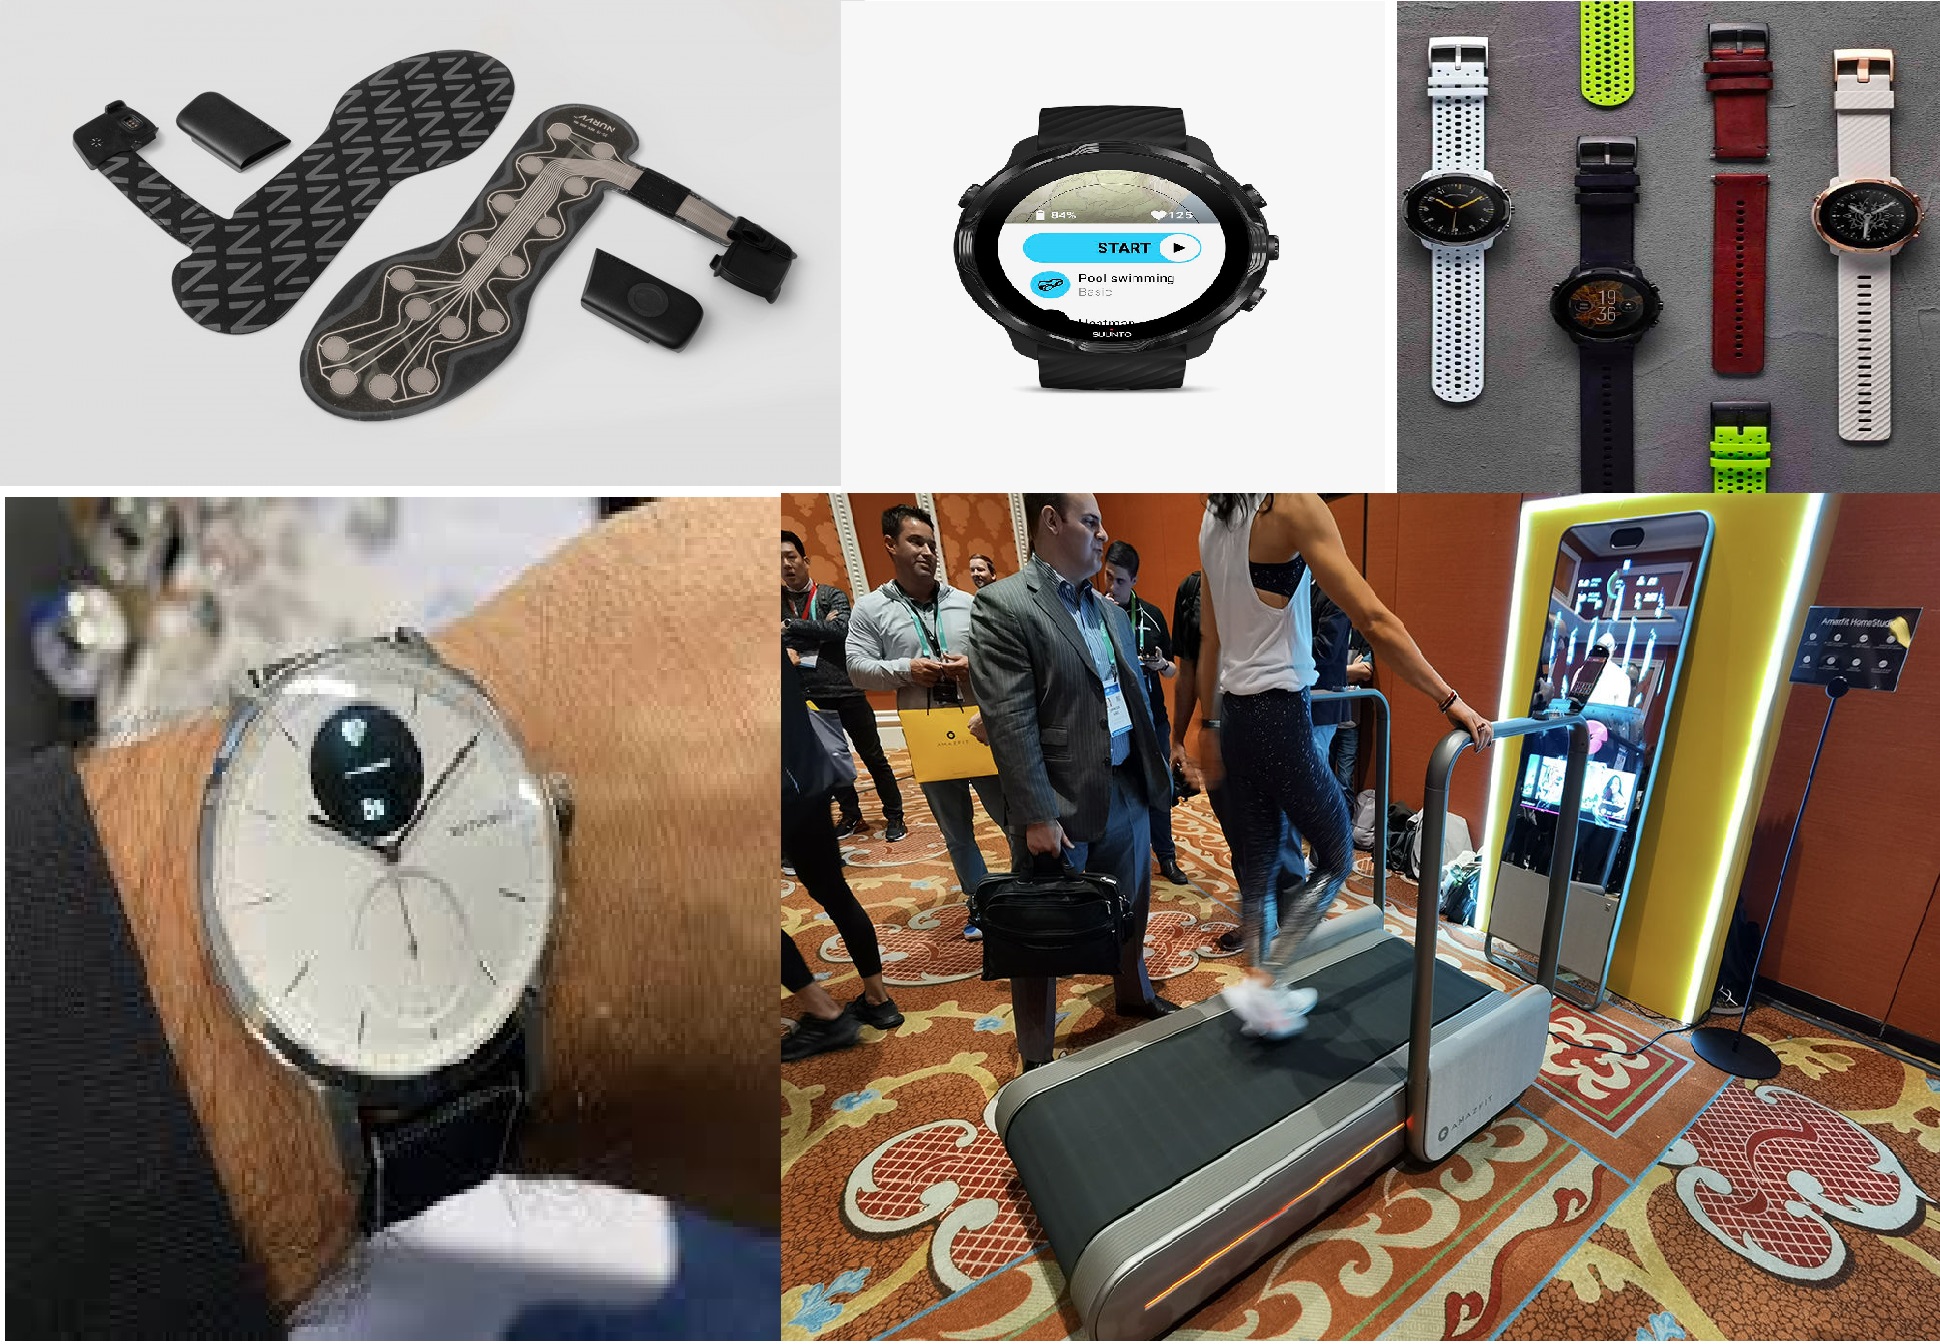 From CES 2020, Peoples will Love these 4 Gadgets of Health and Fitness